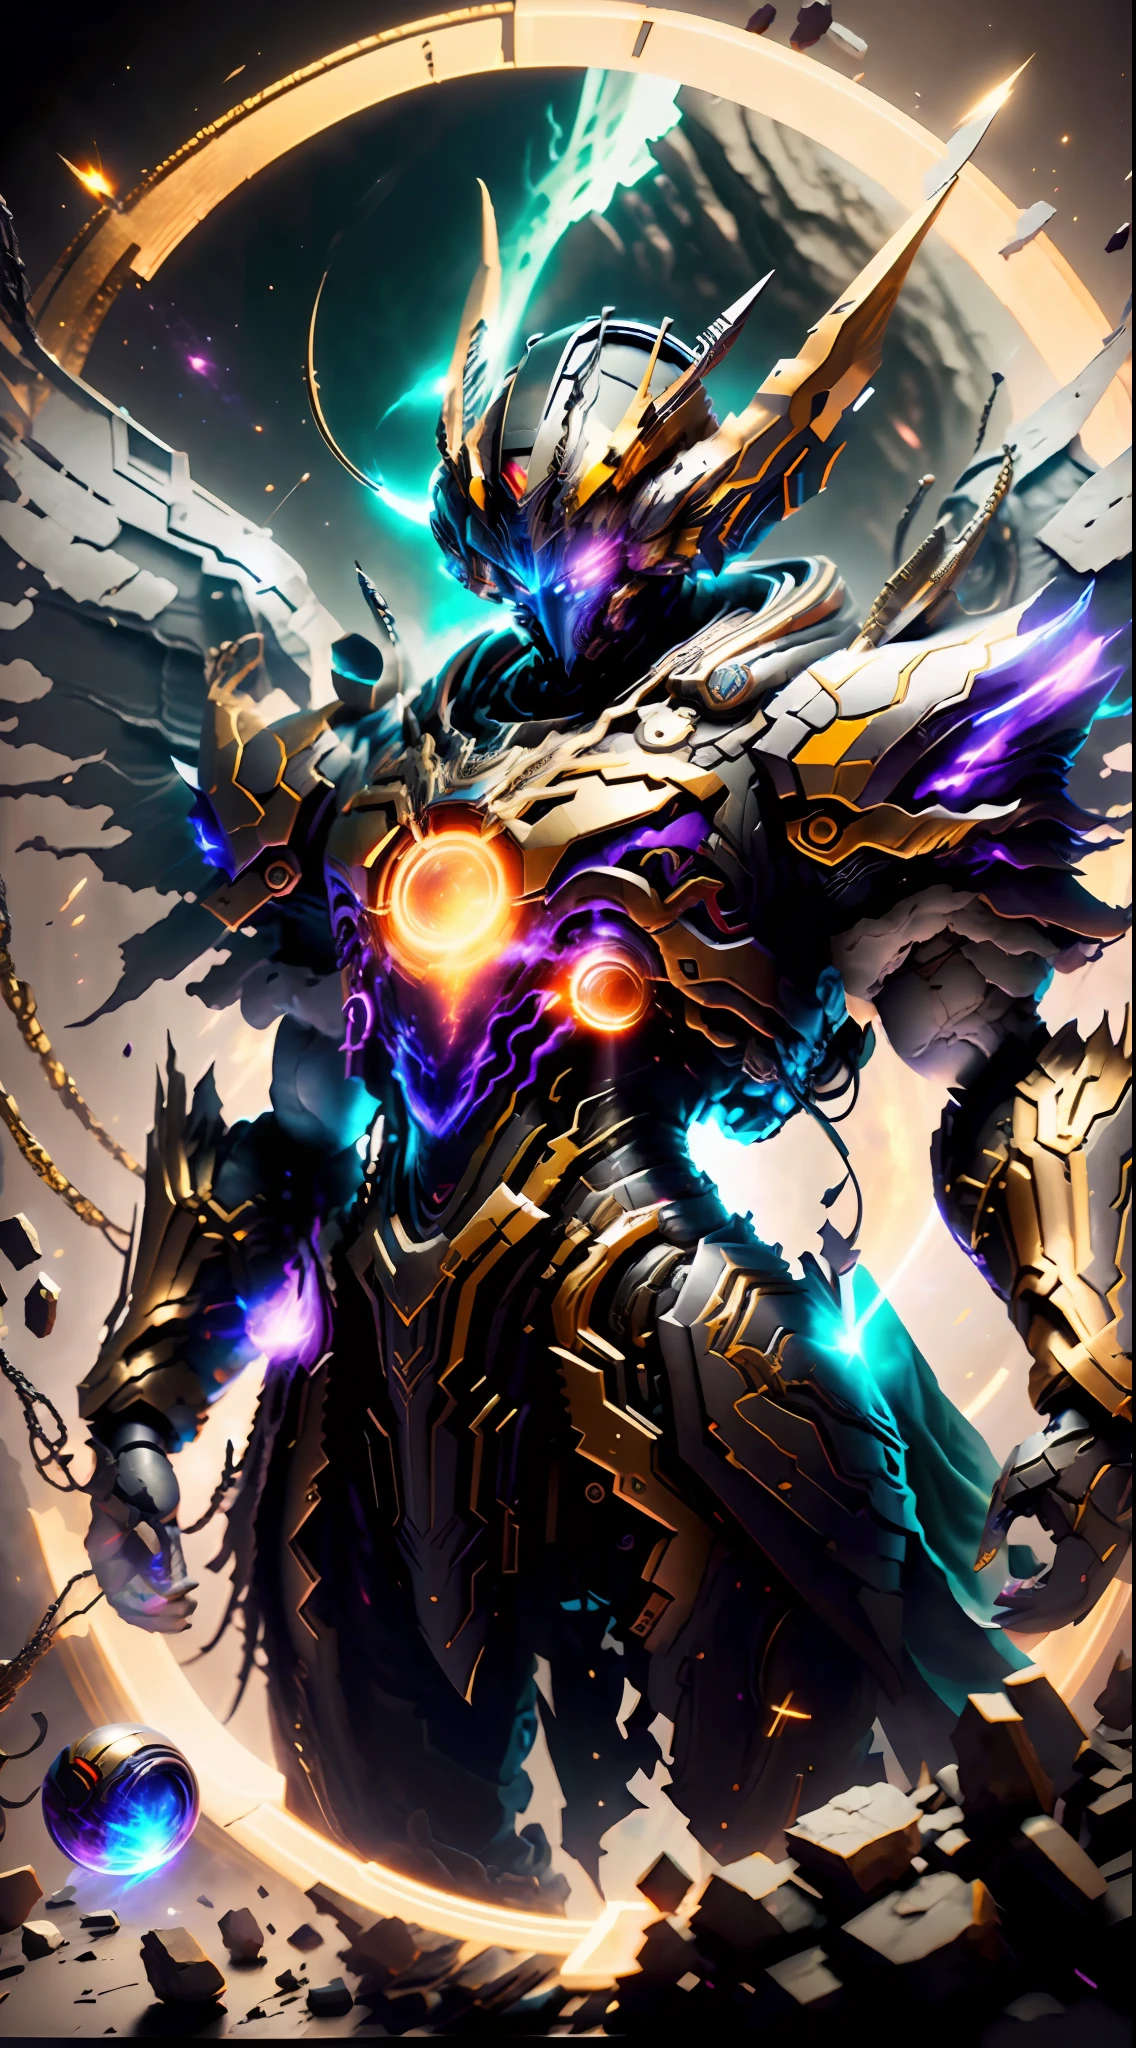 A Dragon Emperor in the Galaxy, (Halo: 1.8), (Round Light: 1.7), Gold Saint Seiya Limb Armor, (Cloak: 1.5), (Dragon Symbol: 1.5), (Gundam 00 Gundam Exia: 1.5), (Starfield: 1.8) (Mecha) (Mechanical) (Armor), (Open Leg: 1.3), Perfect, (Wide Angle), (Black Background: 1.6), Best Quality, Masterpiece, Super Resolution, (Reality: 1.4), Crazy Detail, Unrealistic Engine Style, Boca effect, David La Chapelle style lens, bioluminescent palette: light blue, light gold, pale pink, bright white, wide angle, super fine, cinematic still life, vibrant, Sakimichan style, perfect eyes, highest image quality 8K, inspired by Harry Winston, Canon EOS R 6 shooting masterpiece "Chaos 50,--, under eye mole, ray tracing, surrealism, textured skin --s2